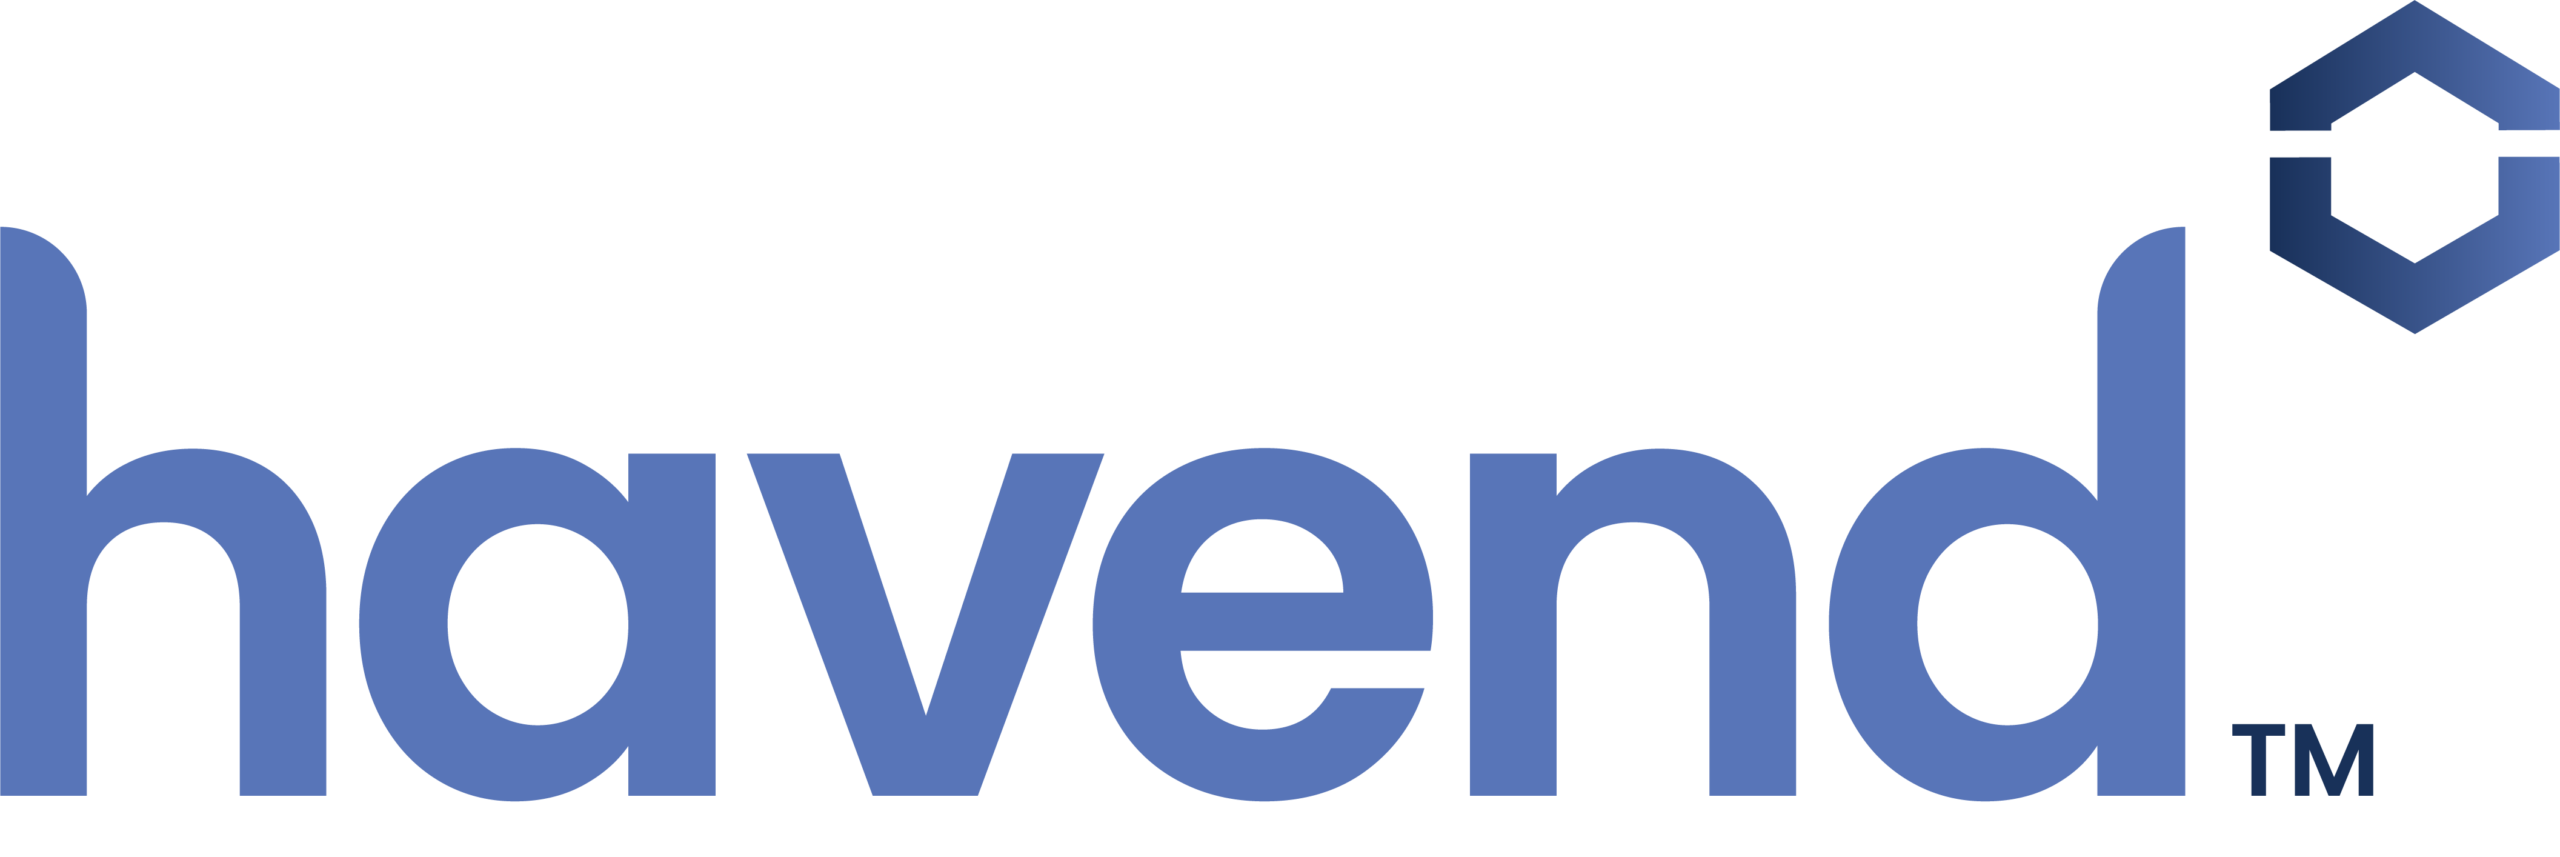 Havend - Insurance Advice, Better Experienced™ - Havend